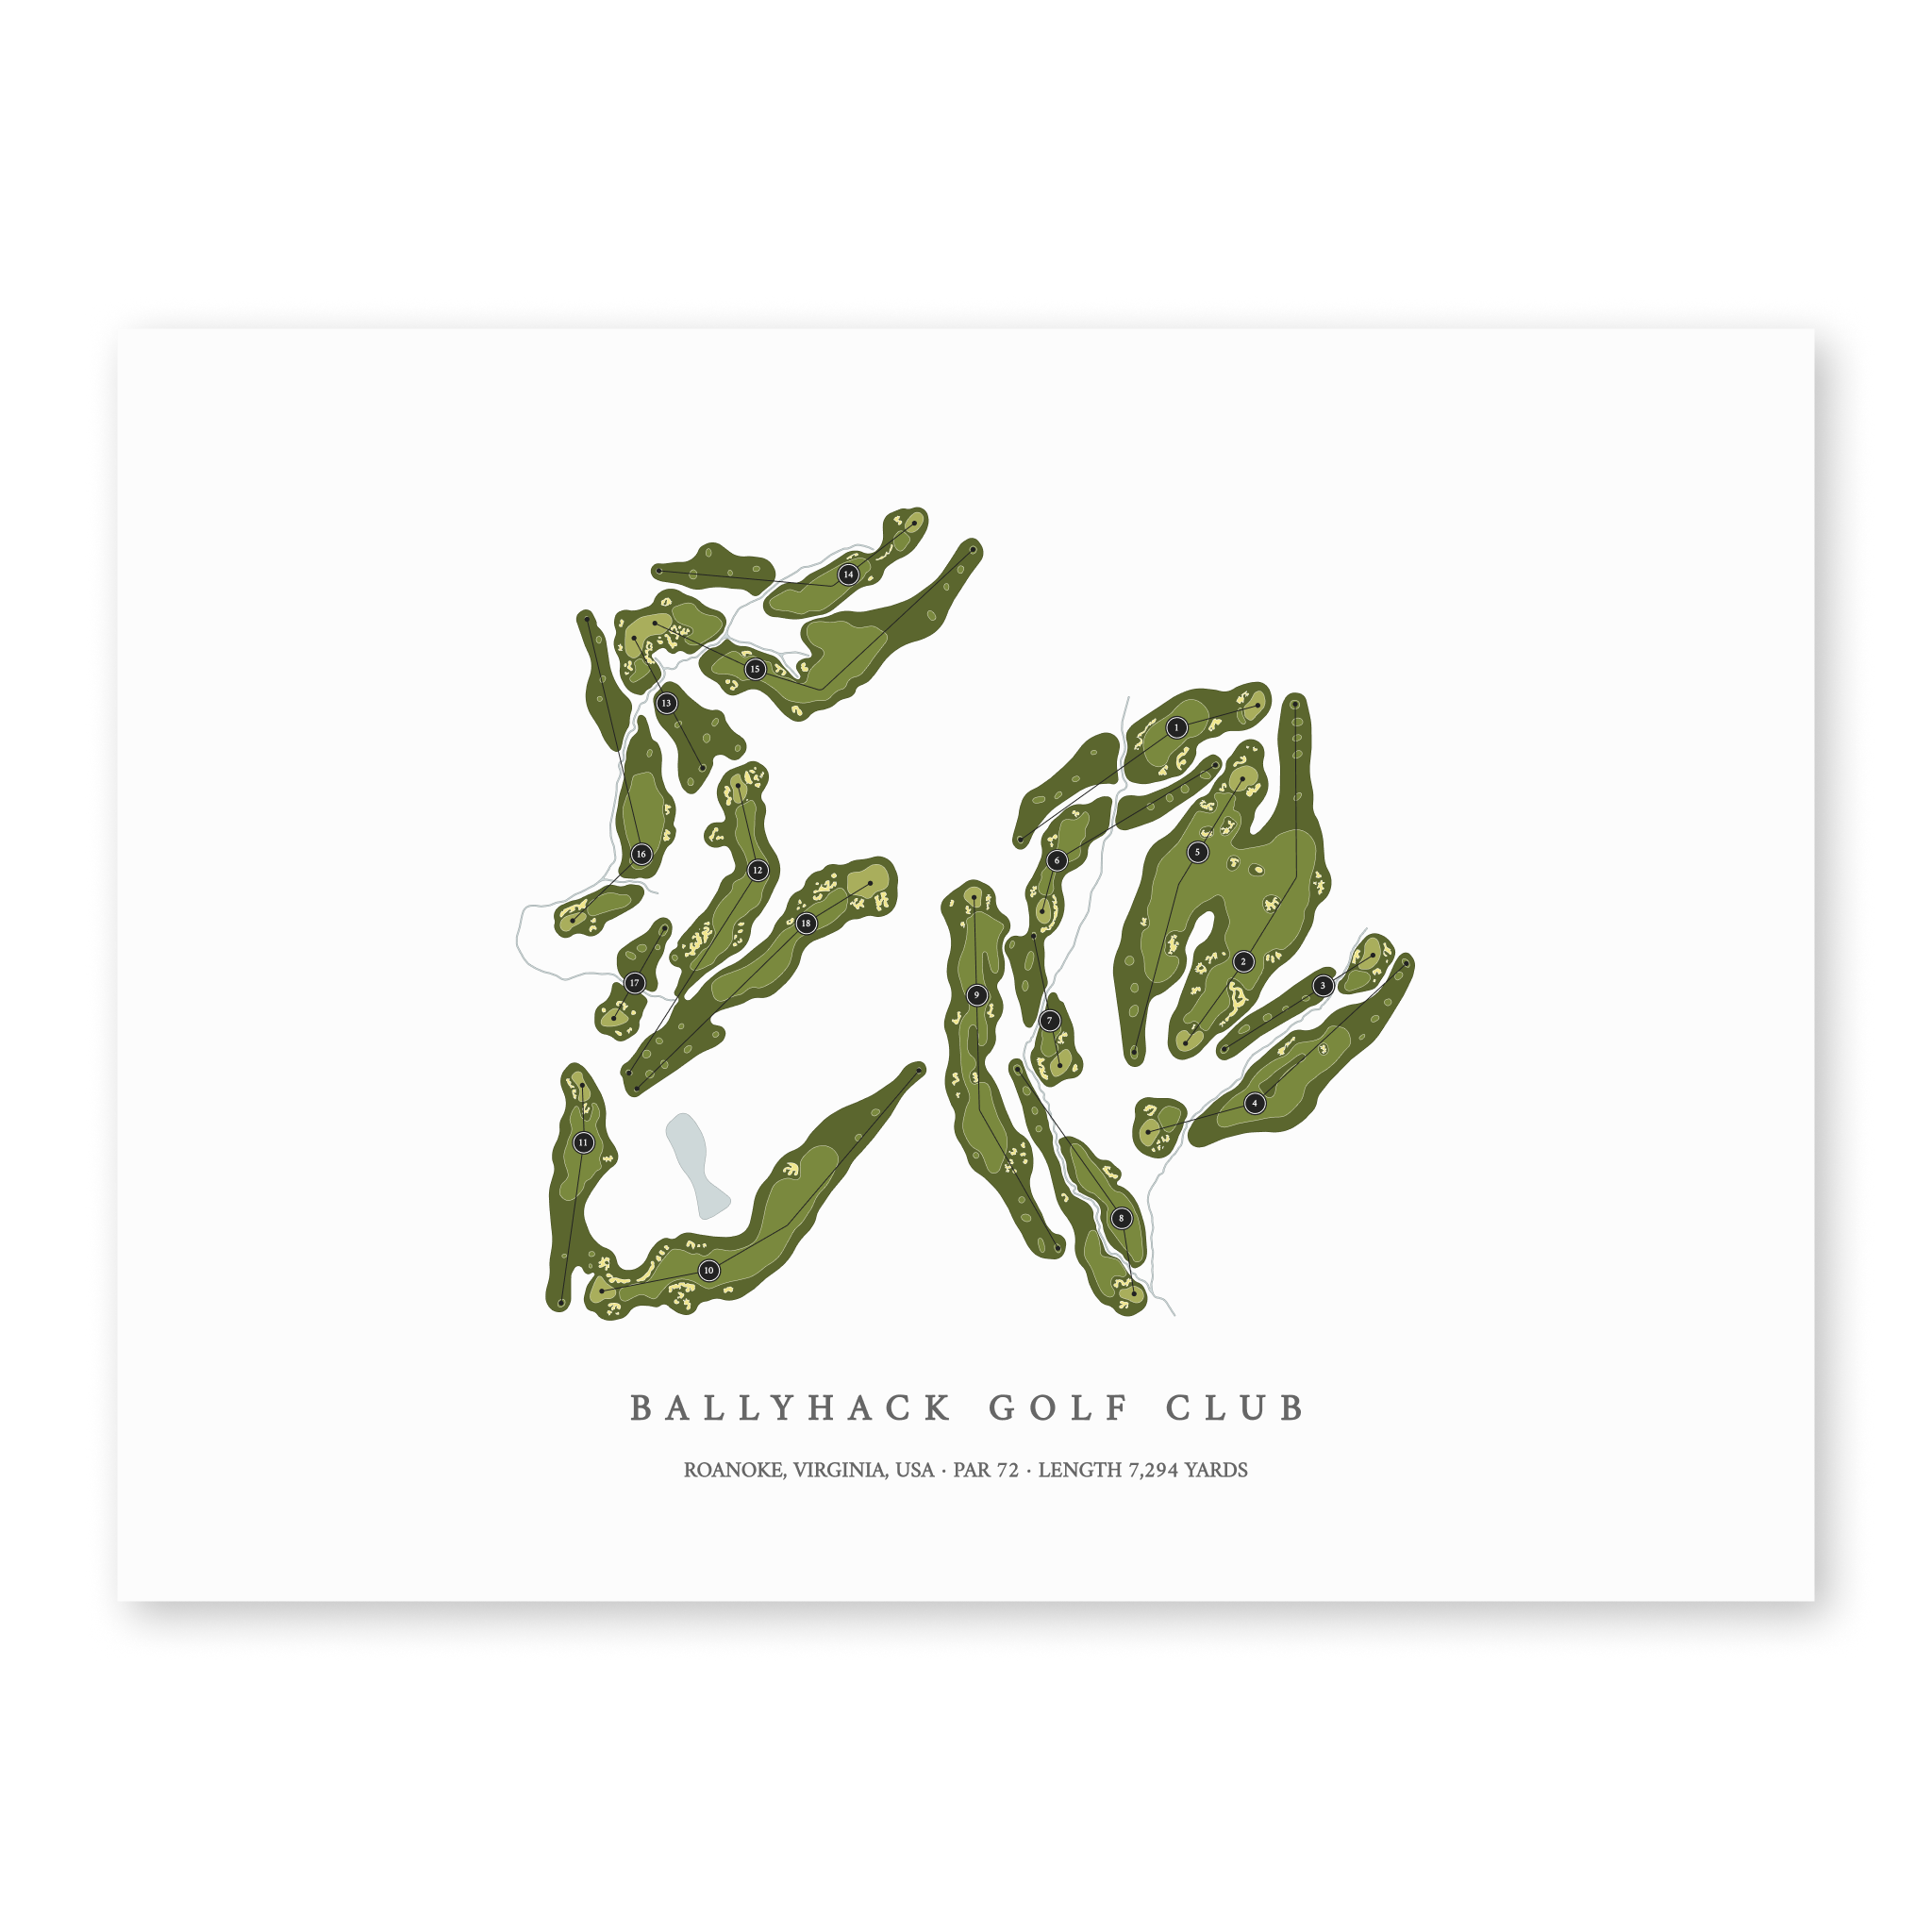 Ballyhack Golf Club| Golf Course Print | Unframed With Hole Numbers #hole numbers_yes